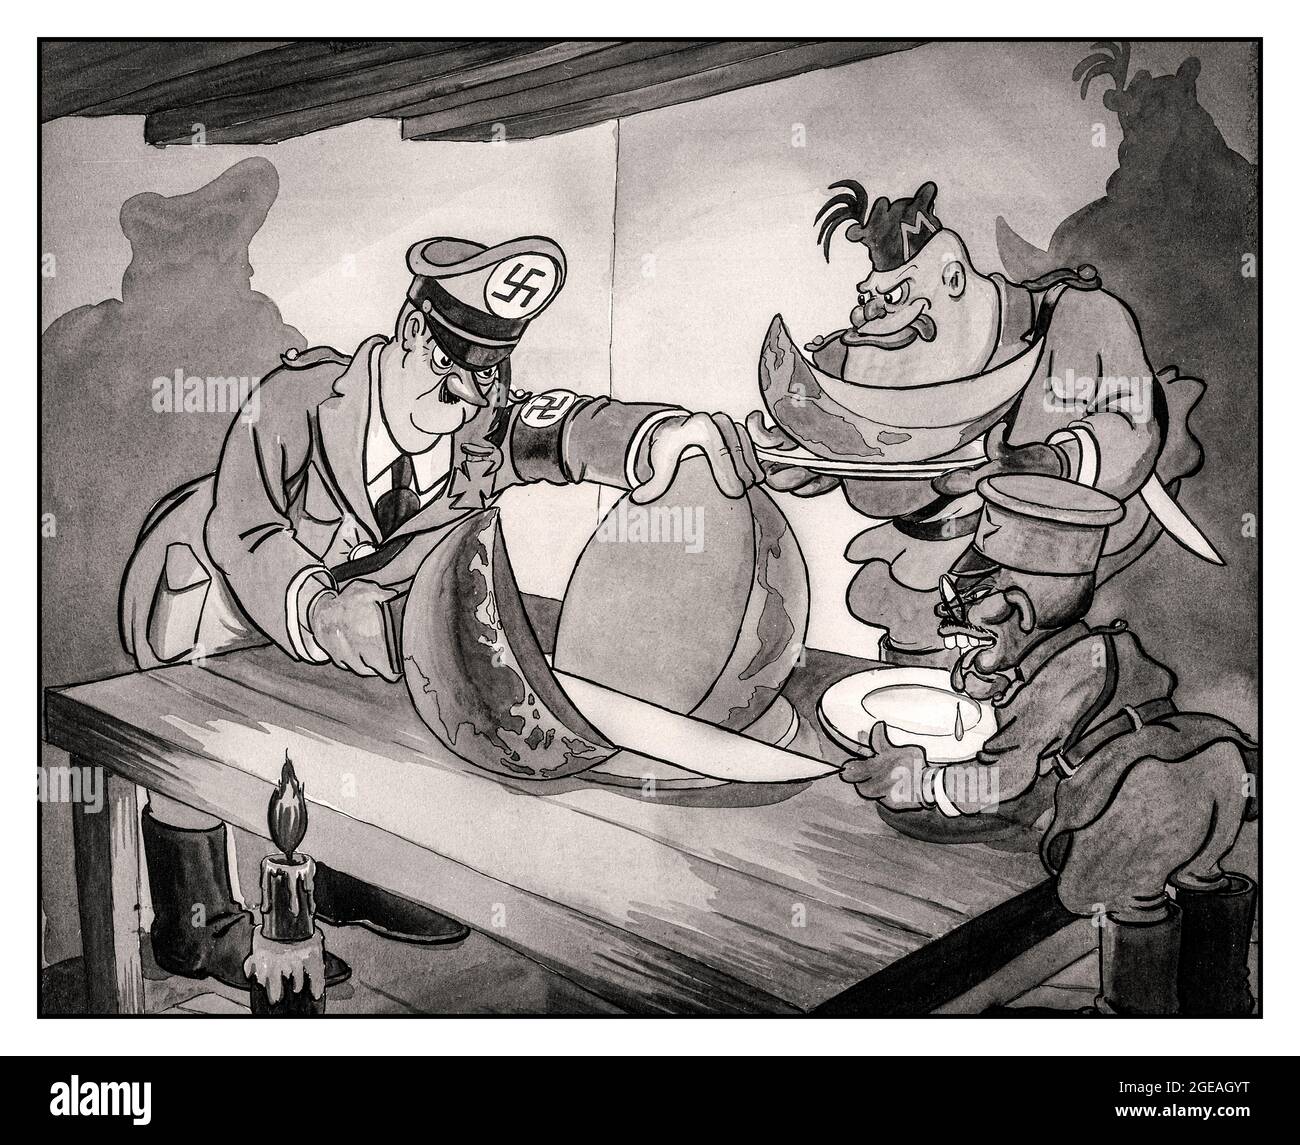 Propaganda Axis WW2 Cartoon of Hitler Mussolini and Hirohito 'To another Asia and The Pacific Ocean dividing slicing up the world, titled : 'The Fruits of Aggression' The WW2 Axis leaders were Adolf Hitler of Germany, Benito Mussolini of Italy, and Hirohito of Japan the political leaders of the three main Axis powers in 1938 and in World War II Stock Photo